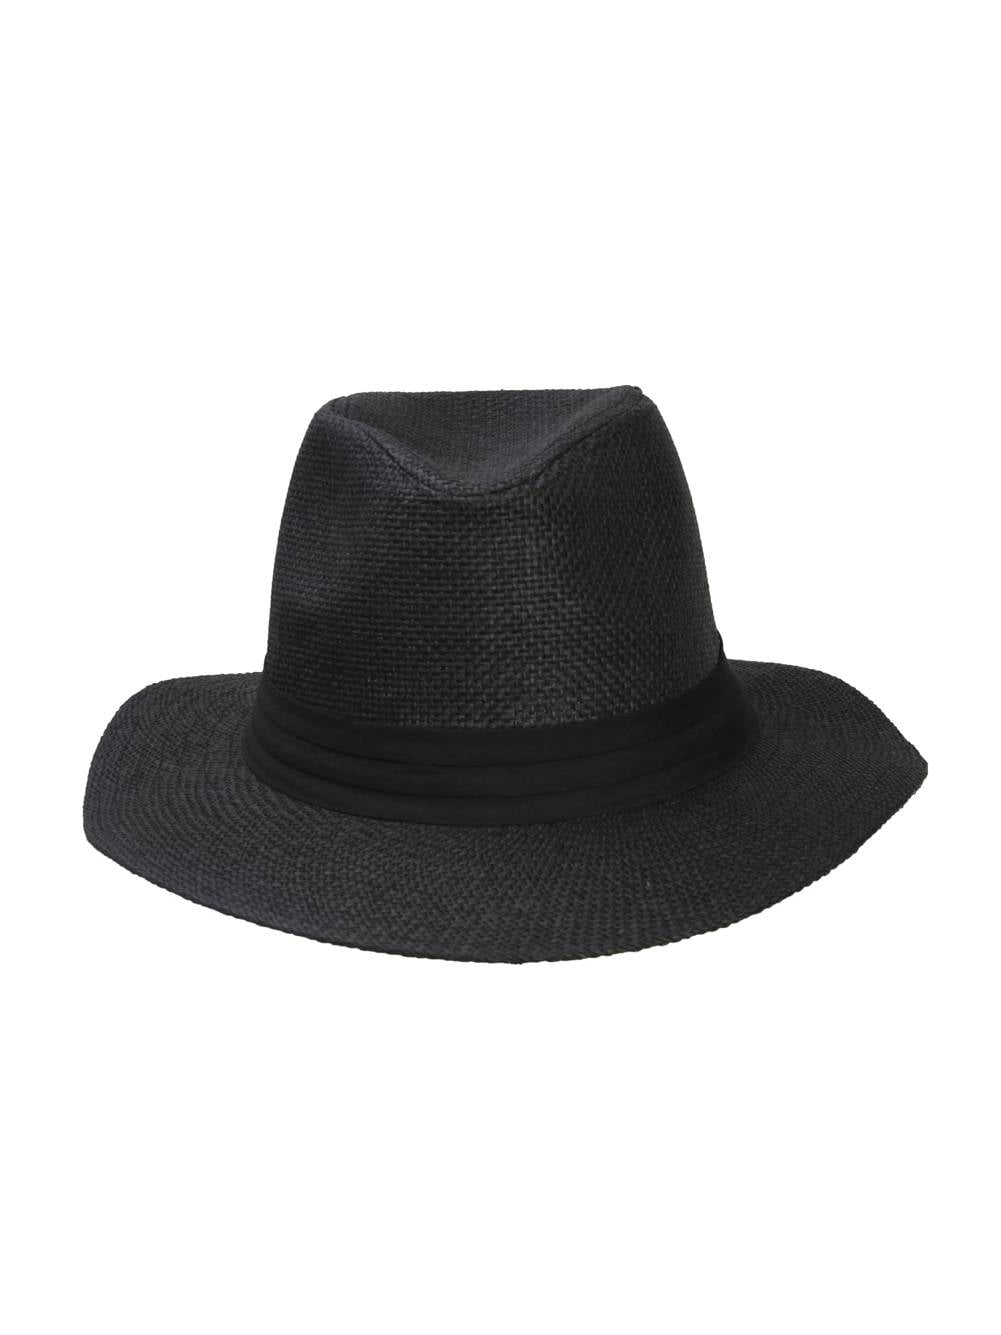 K~K~M Fashion and Leisure of Women and Mens Wool Retro Wide-Brimmed caps Trend 